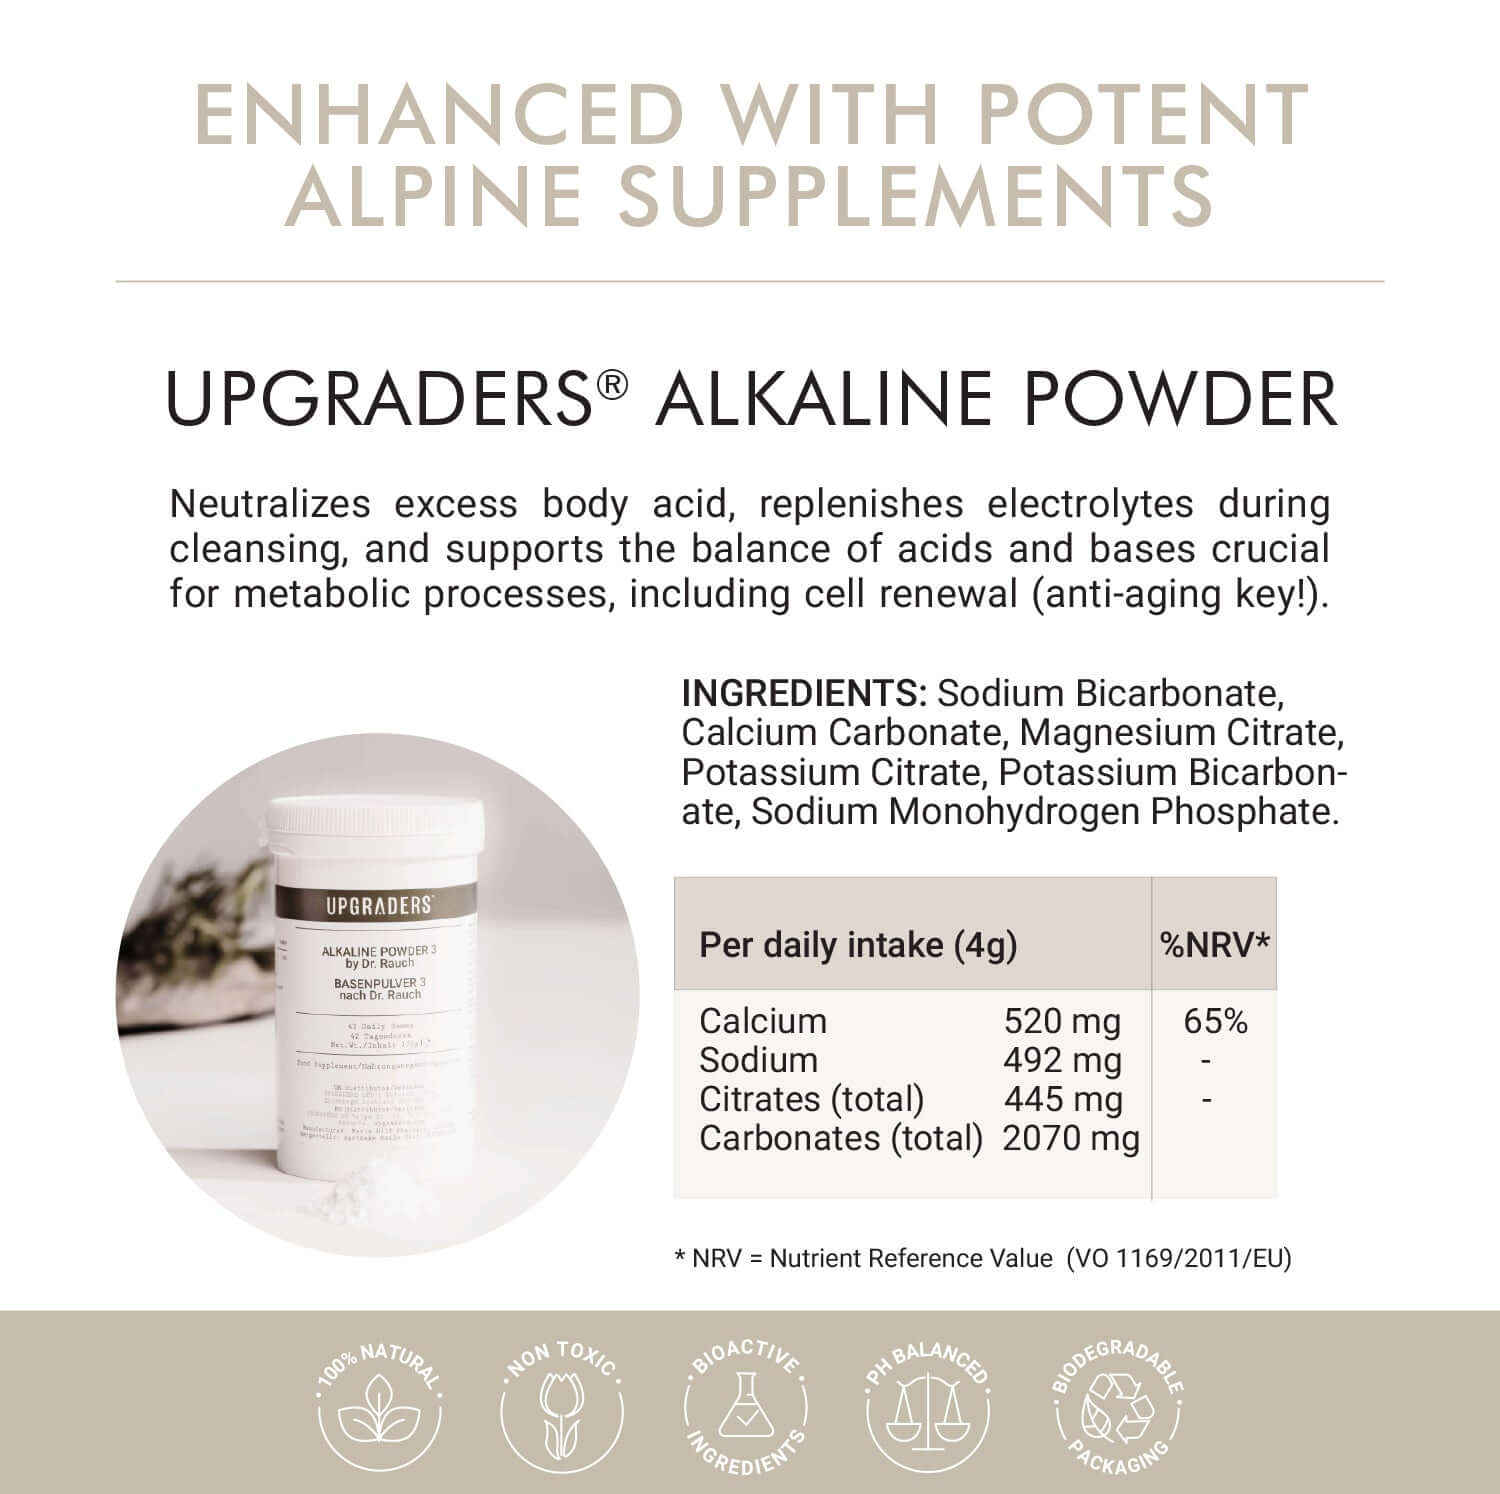 Alkaline Powder: ingredients and benefits listed